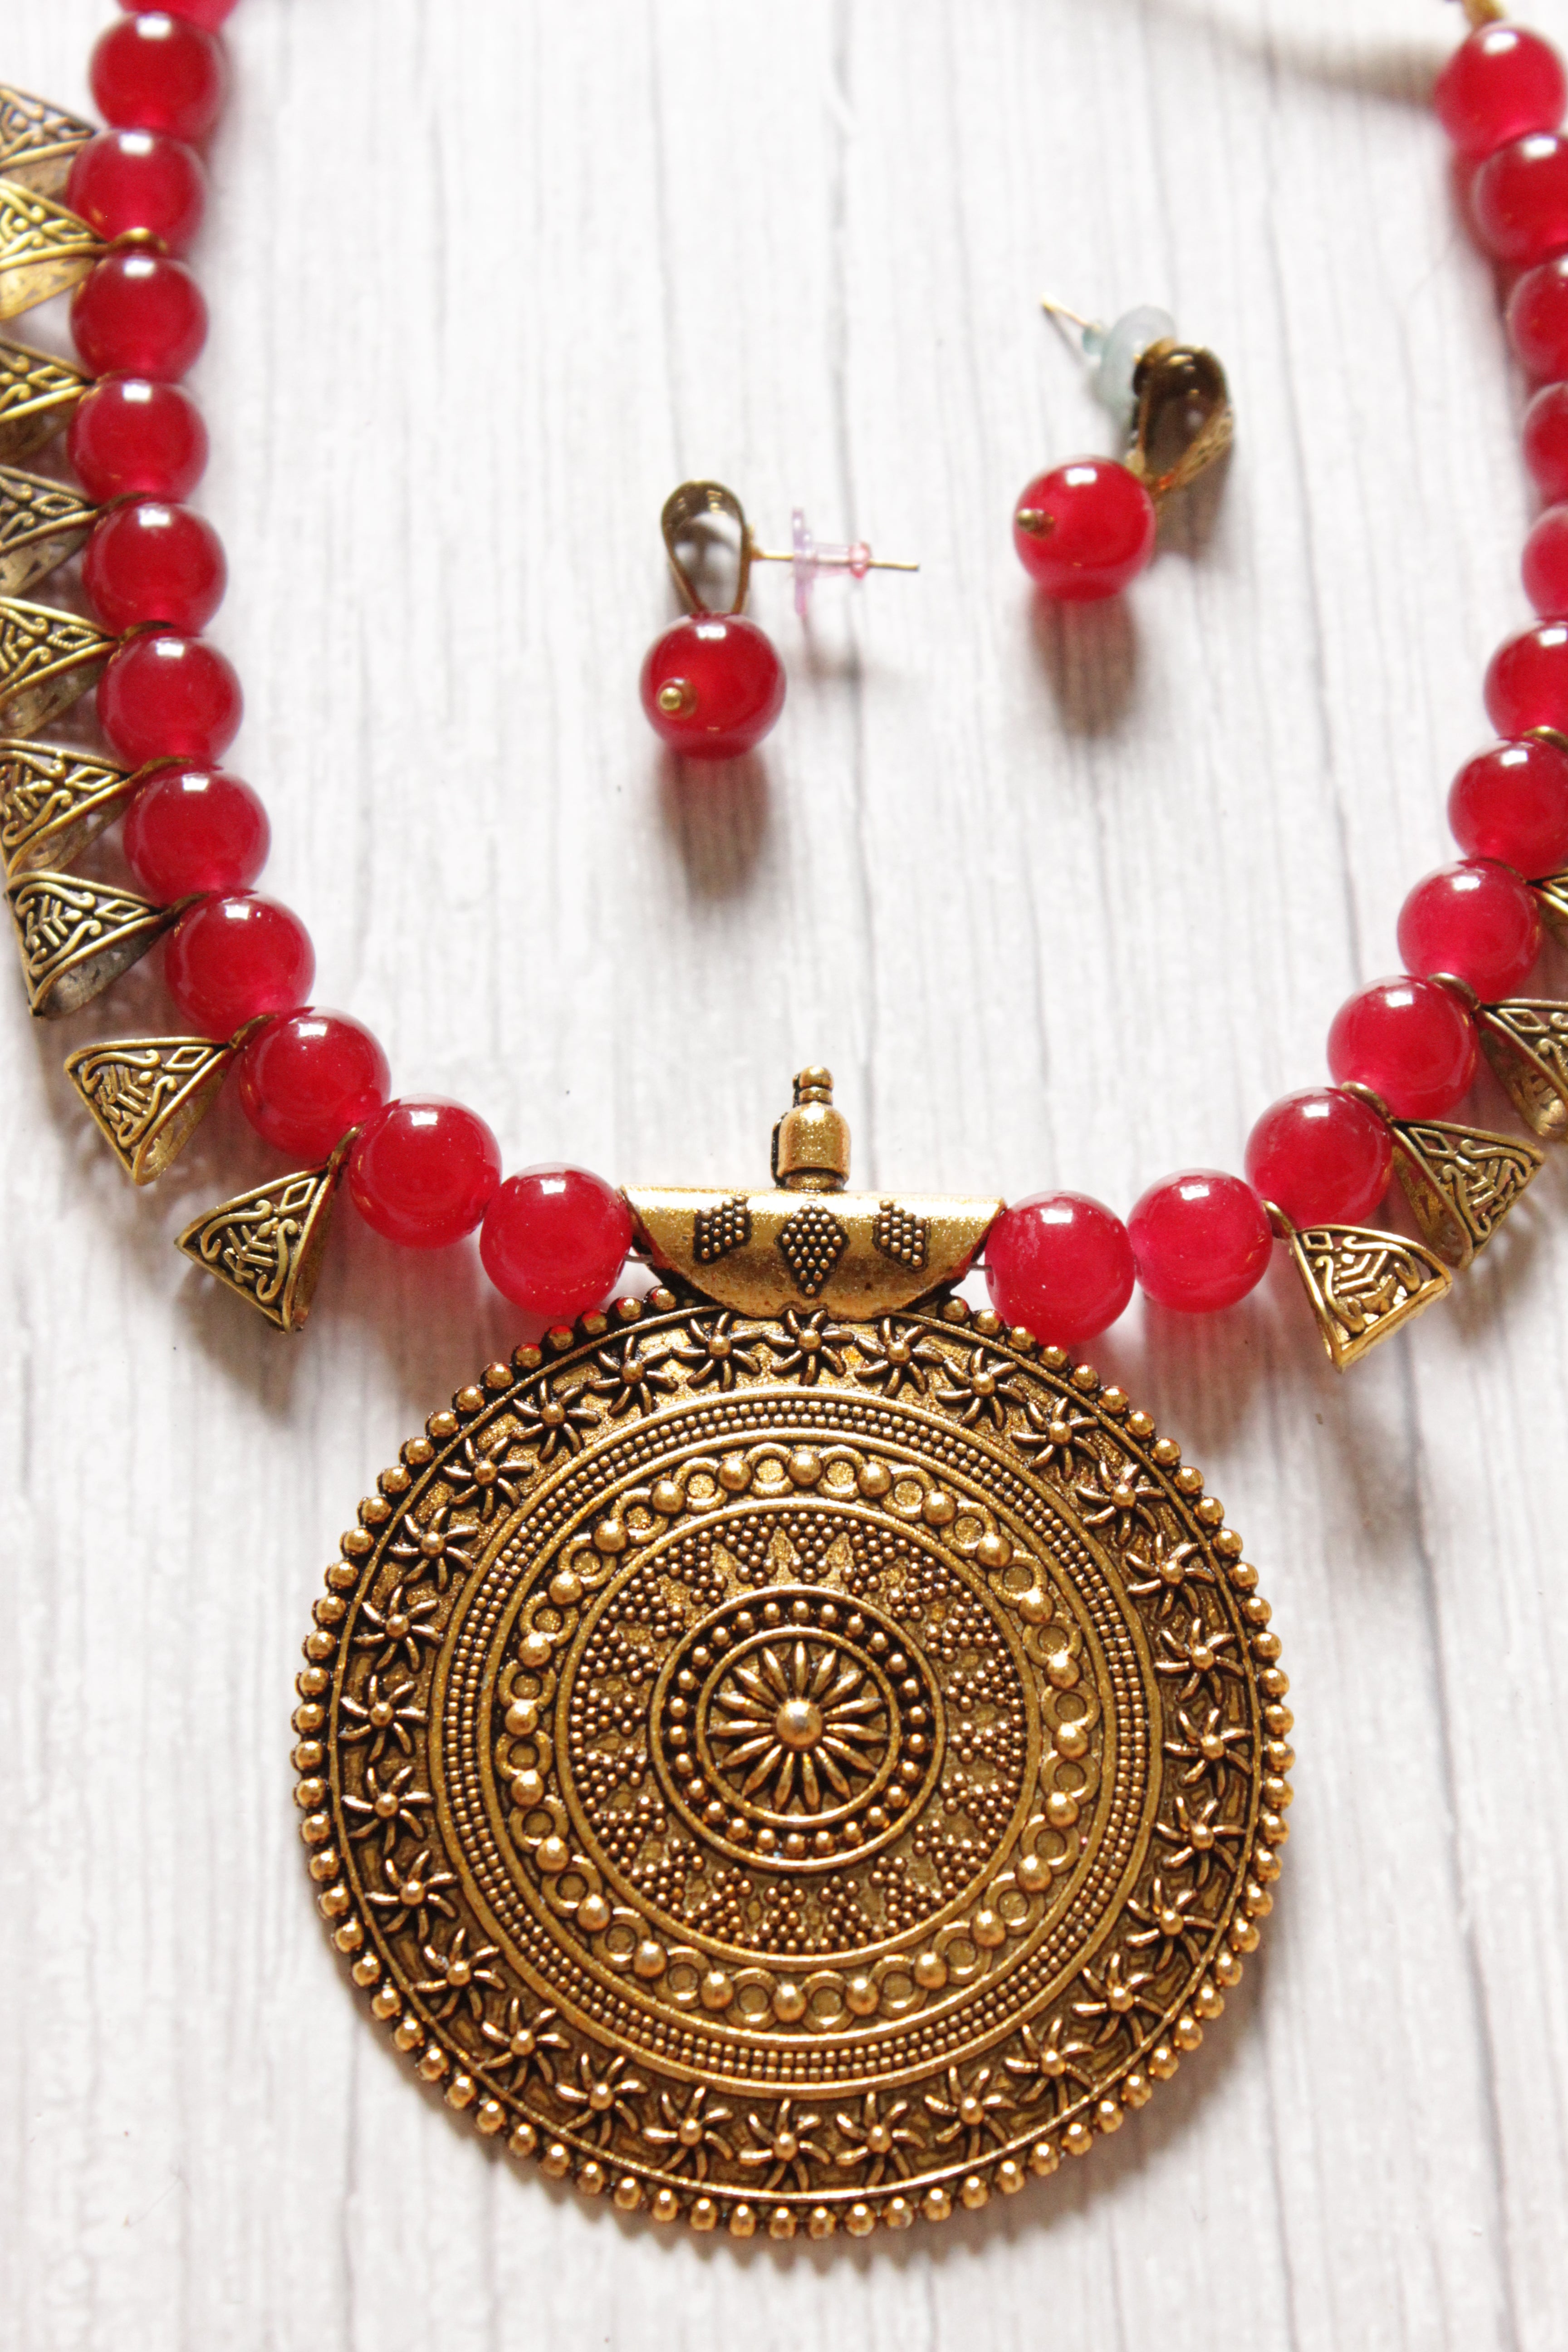 Gold-Toned Red Glass Beads Necklace Set with Statement Pendant